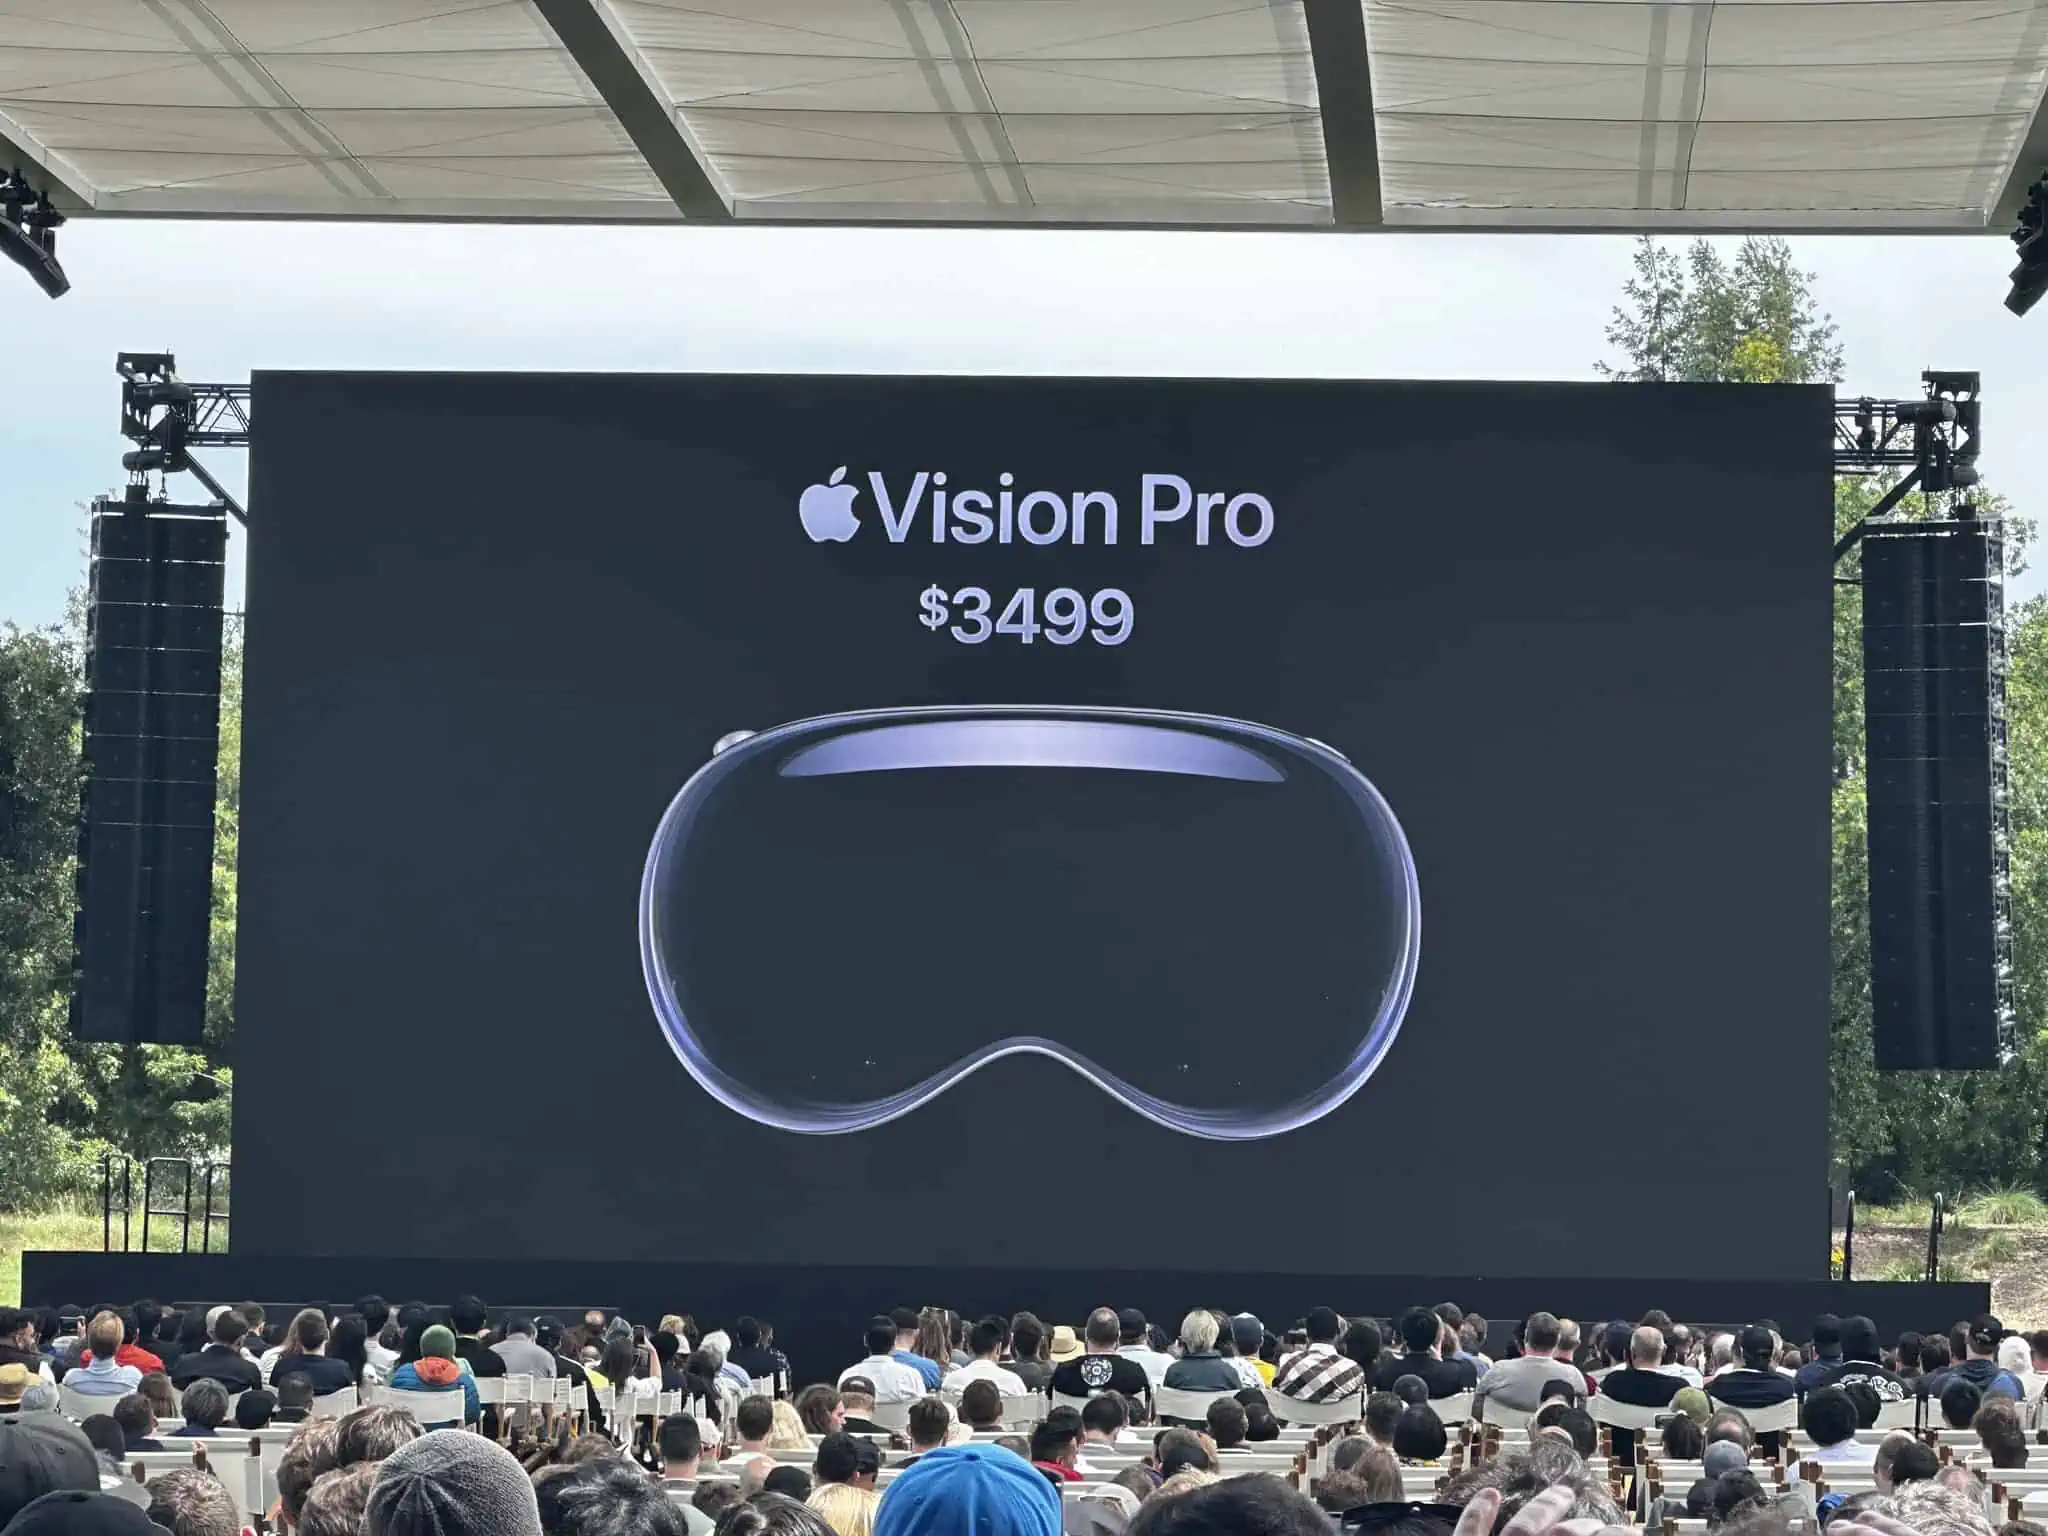 Introducing Apple Vision Pro: Apple's first spatial computer